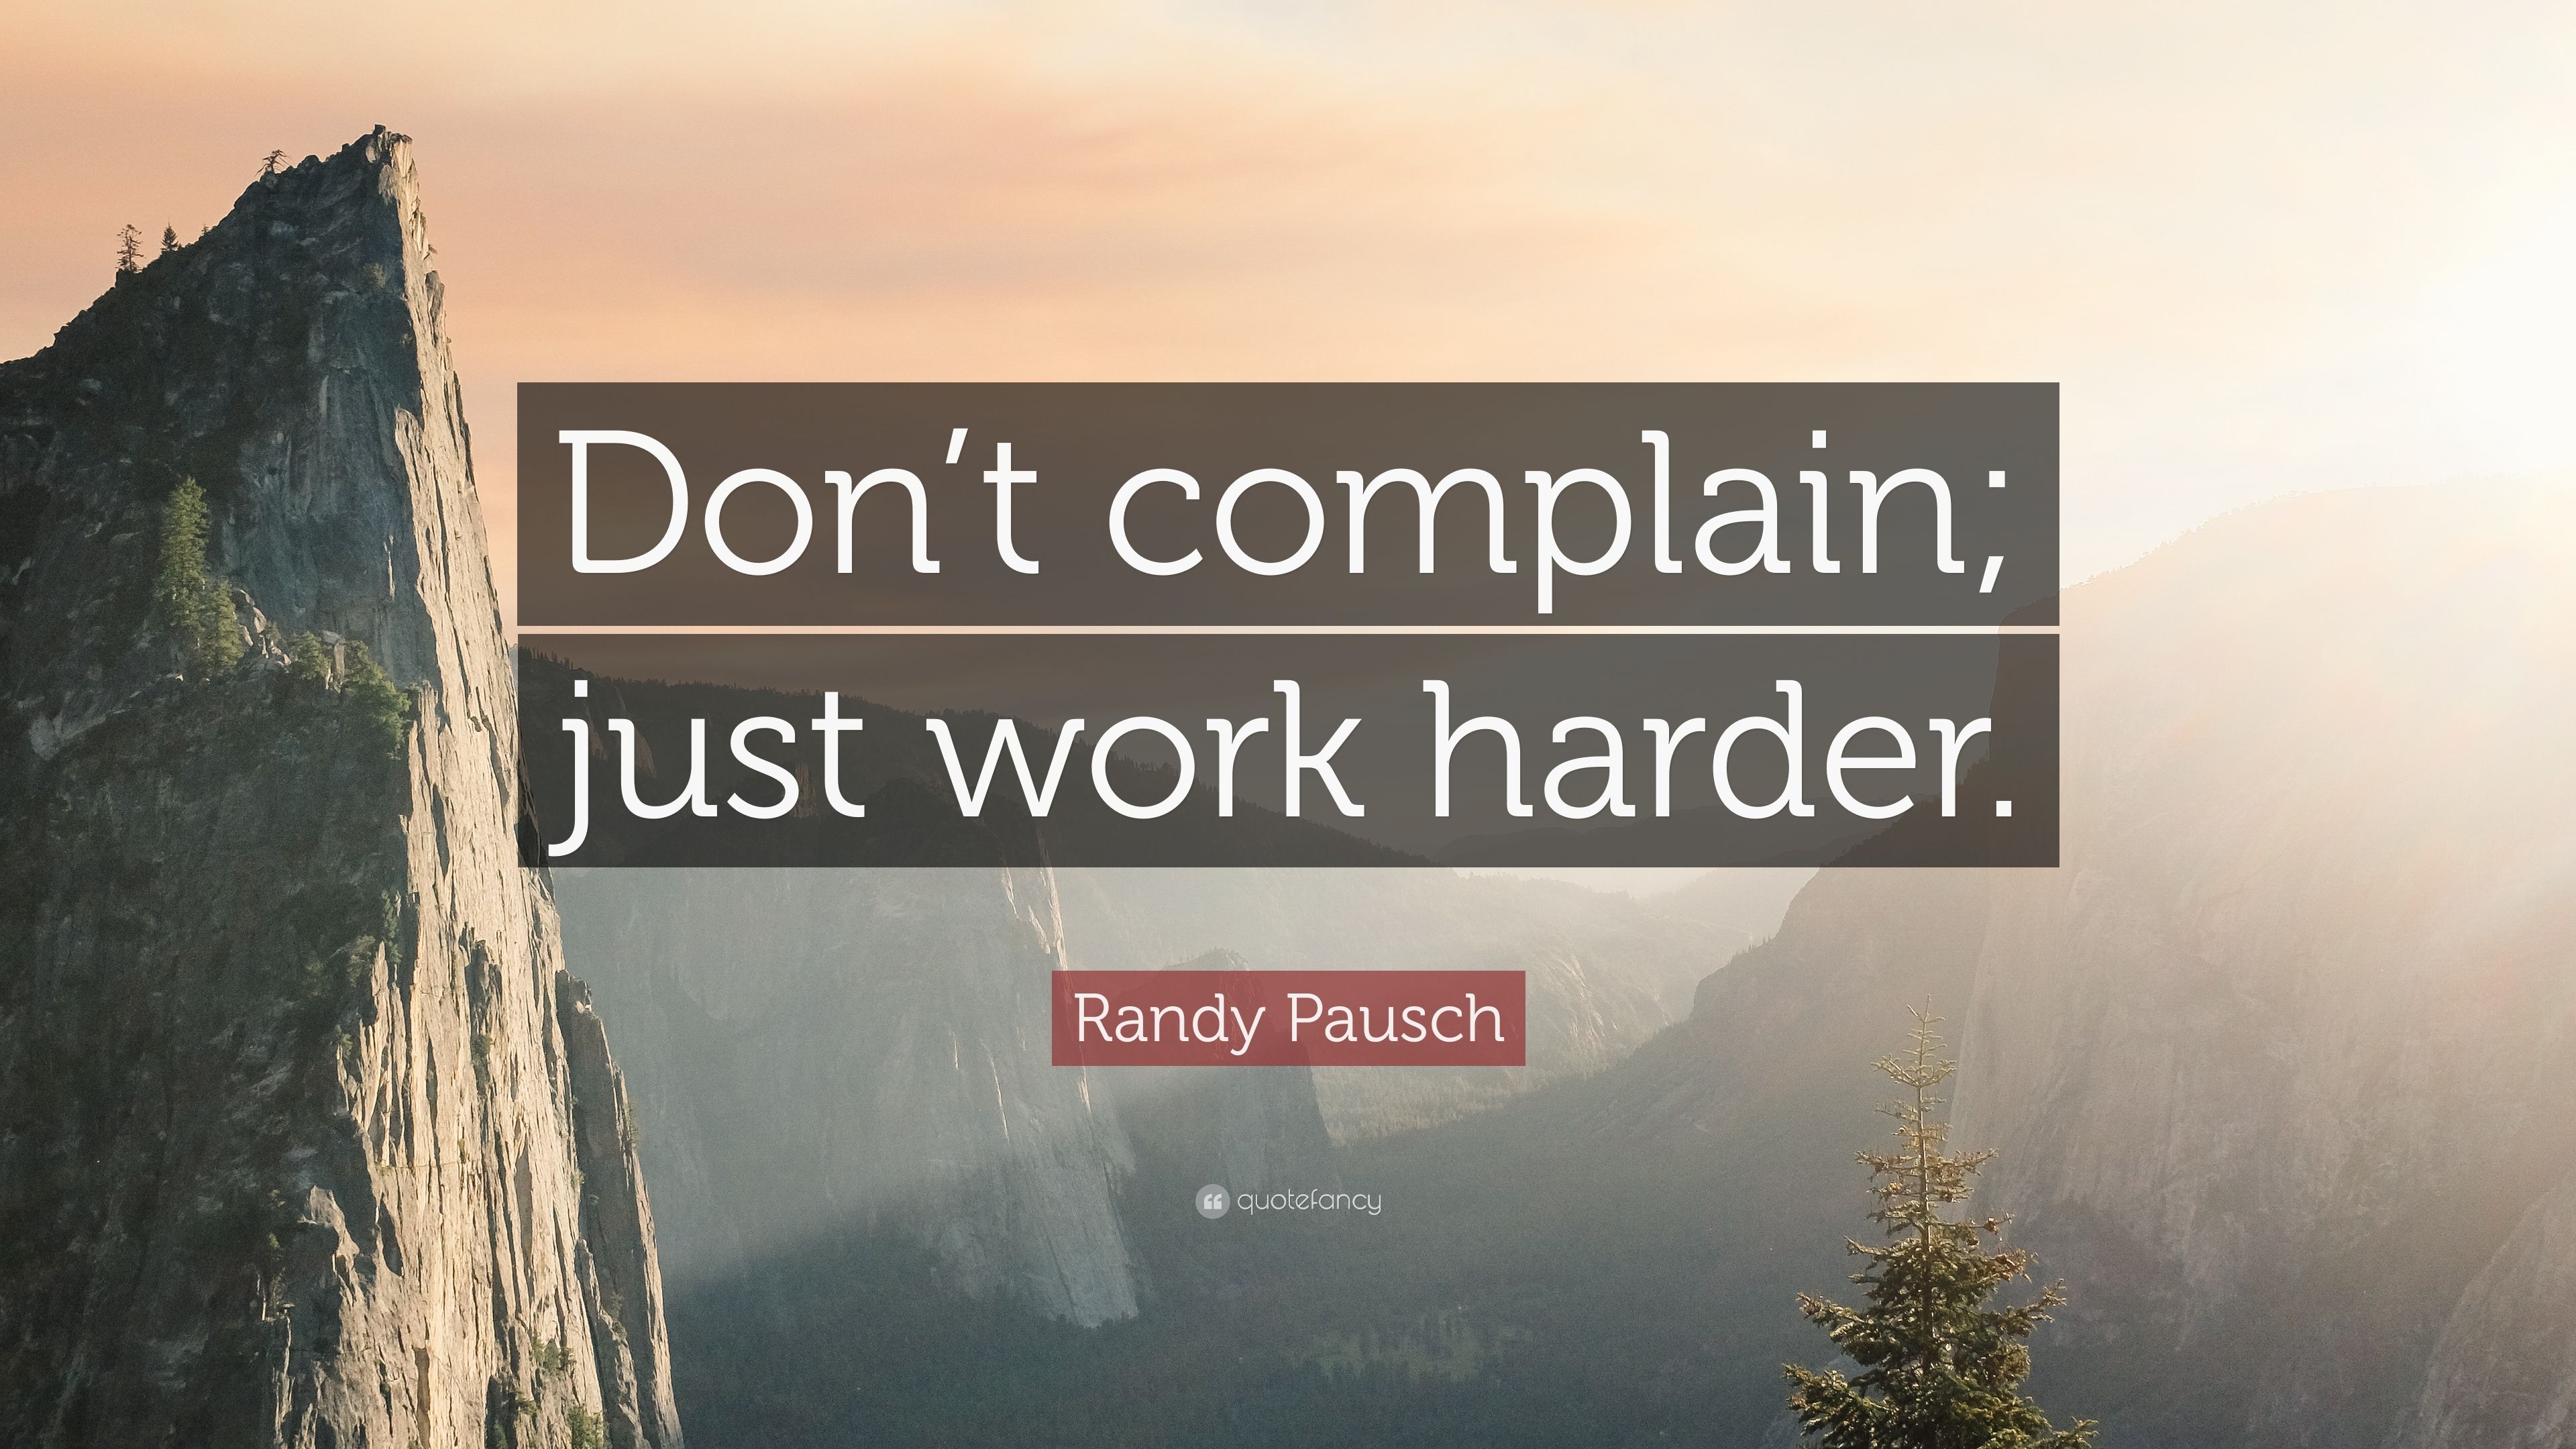 Randy Pausch Quote: "Don't complain; just work harder. 